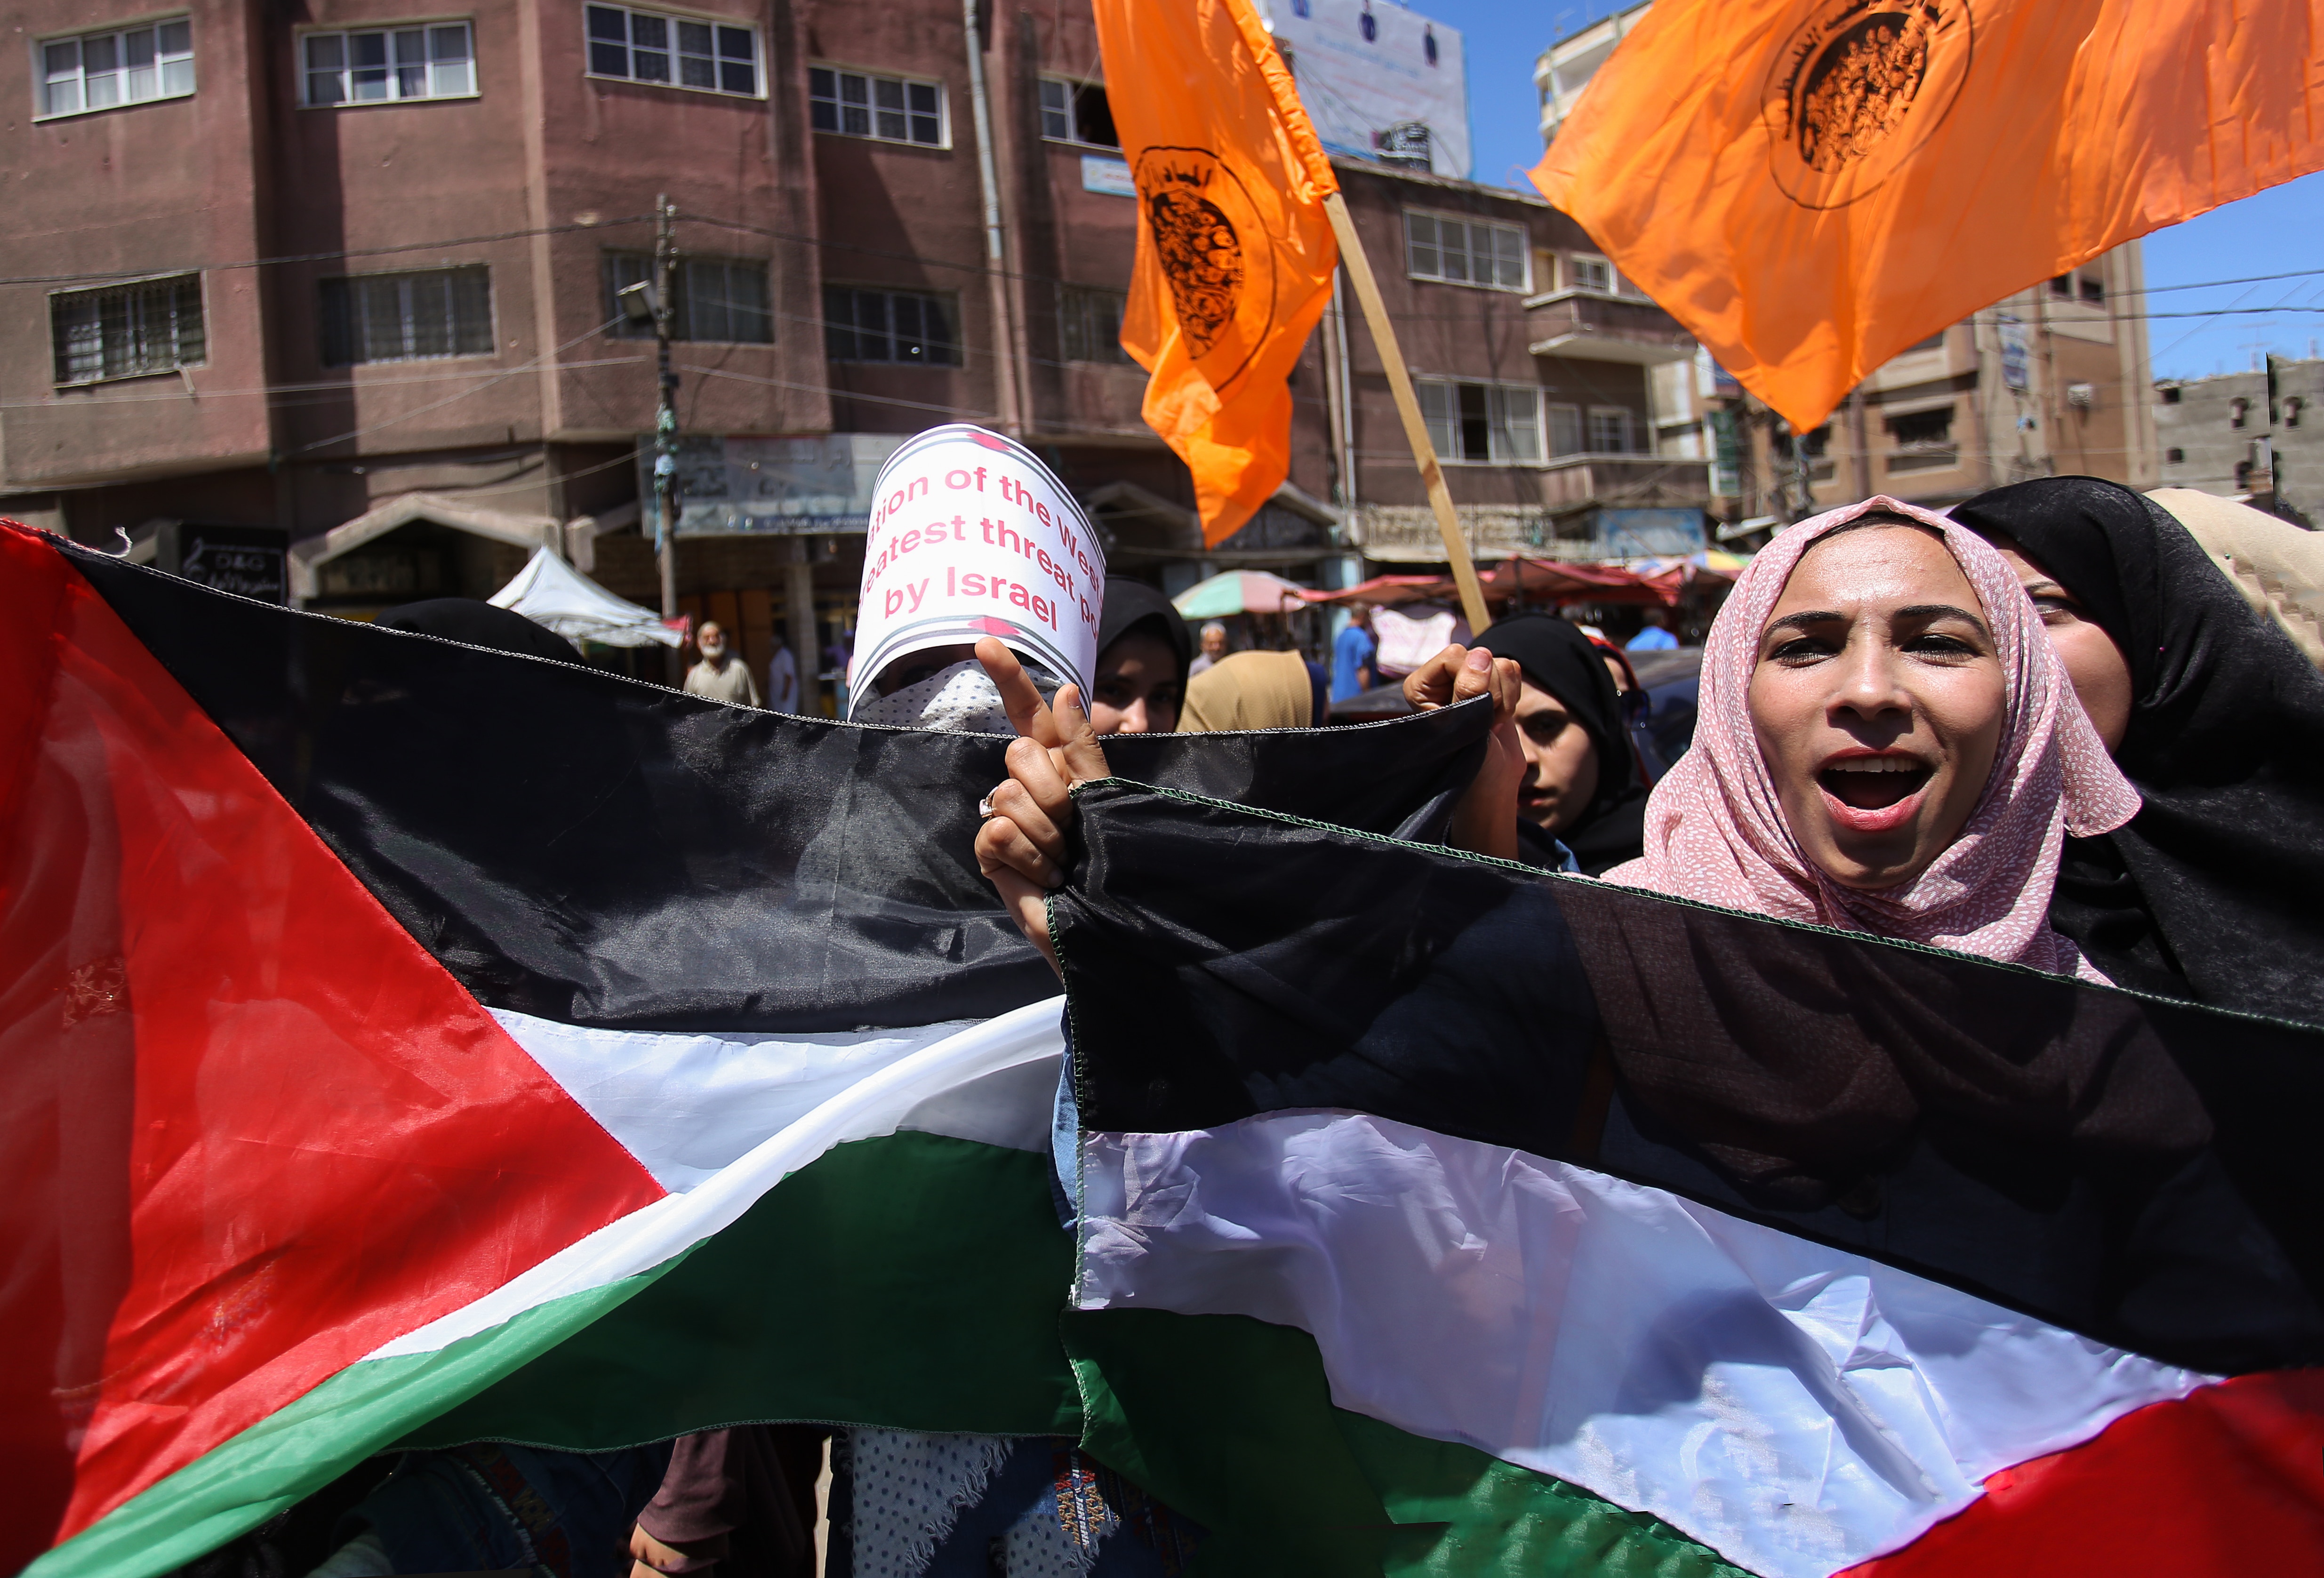 Hundreds of Israelis demonstrated against Prime Minister Benjamin Netanyahu's plan to annex the Jordan Valley and illegal settlements in the occupied West Bank.